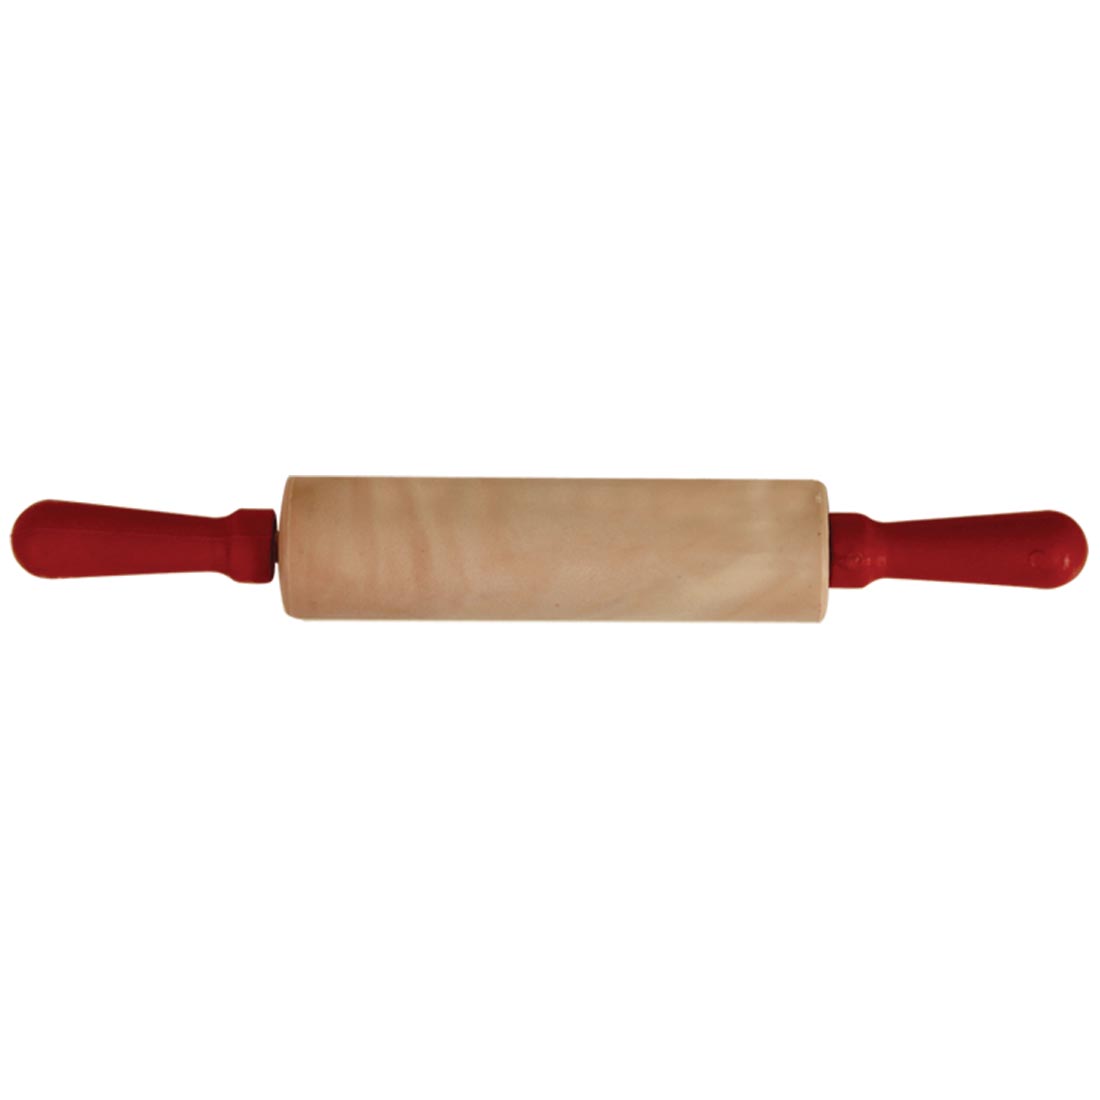 Plastic Rolling Pin with red handles